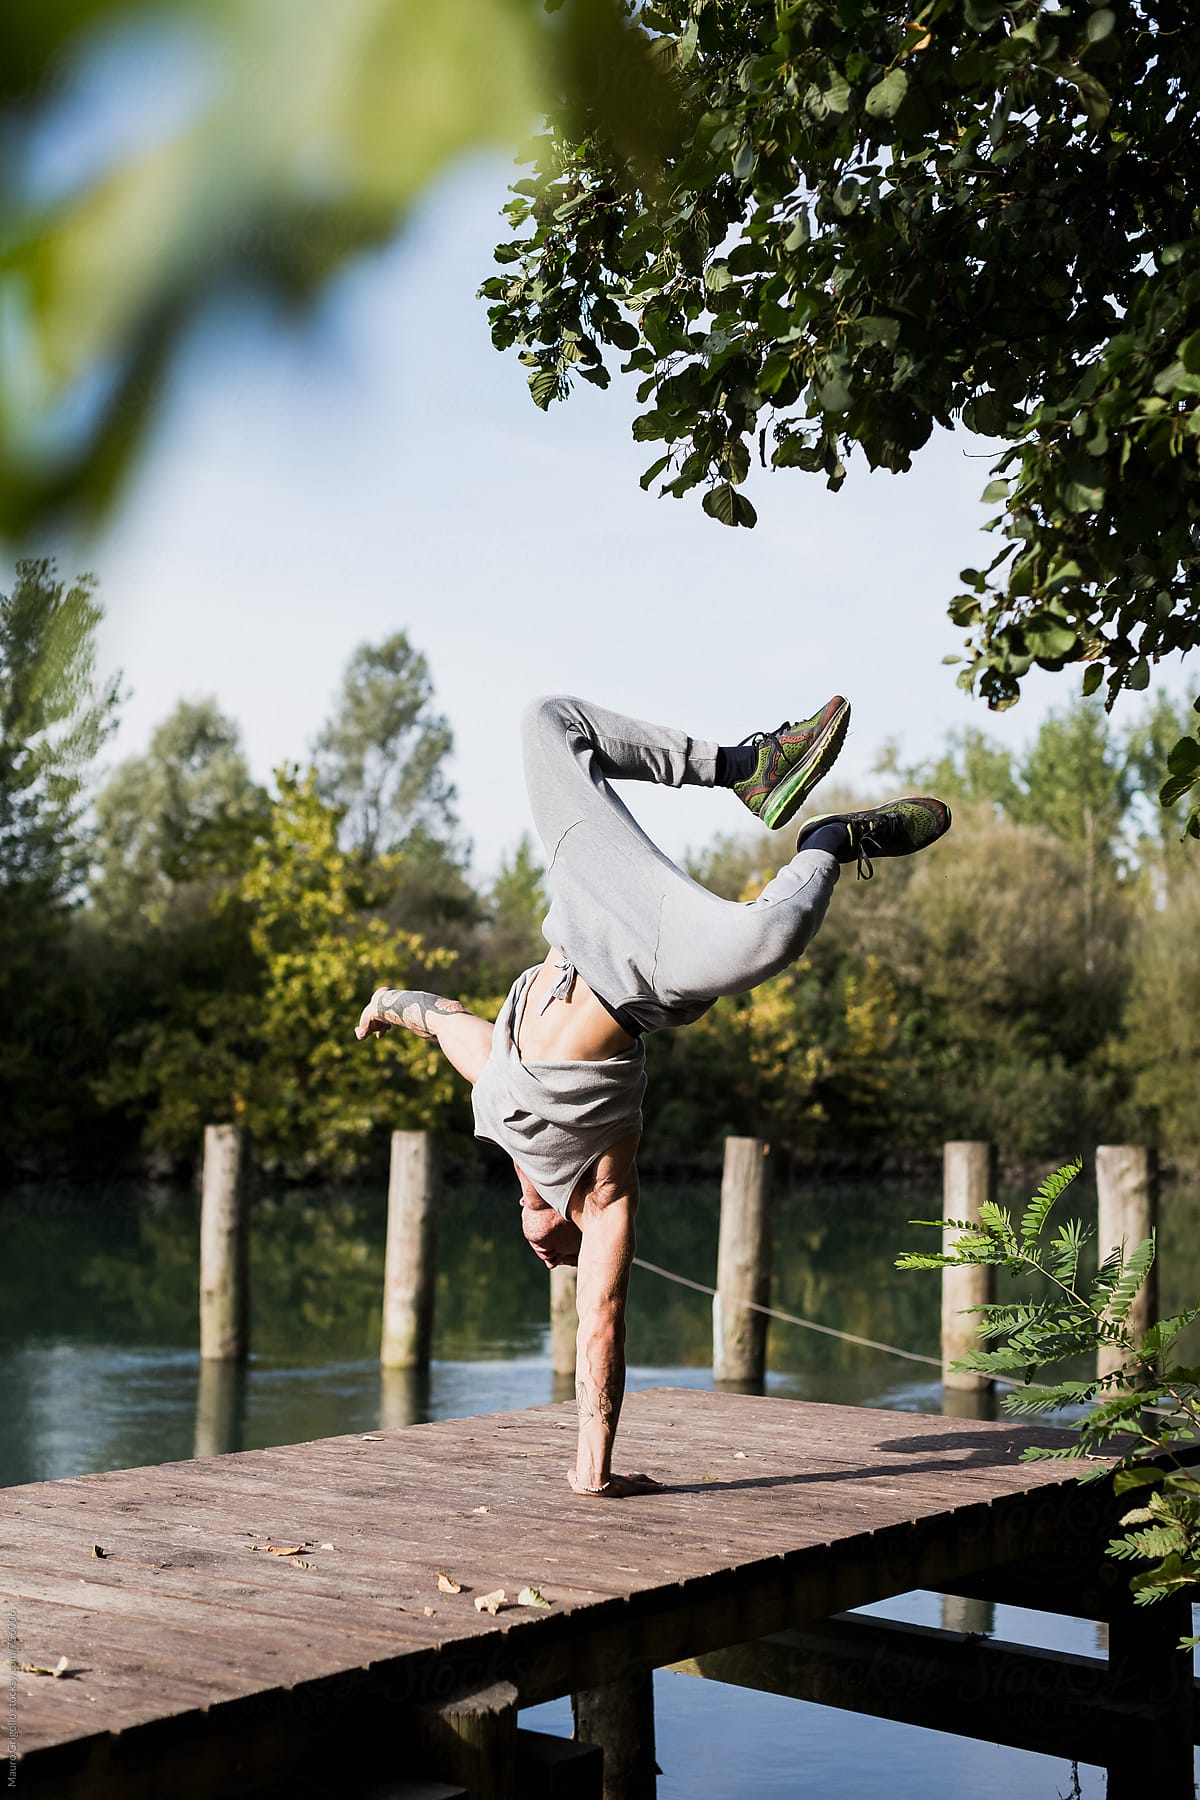 Man doing one arm Handstand in a jetty